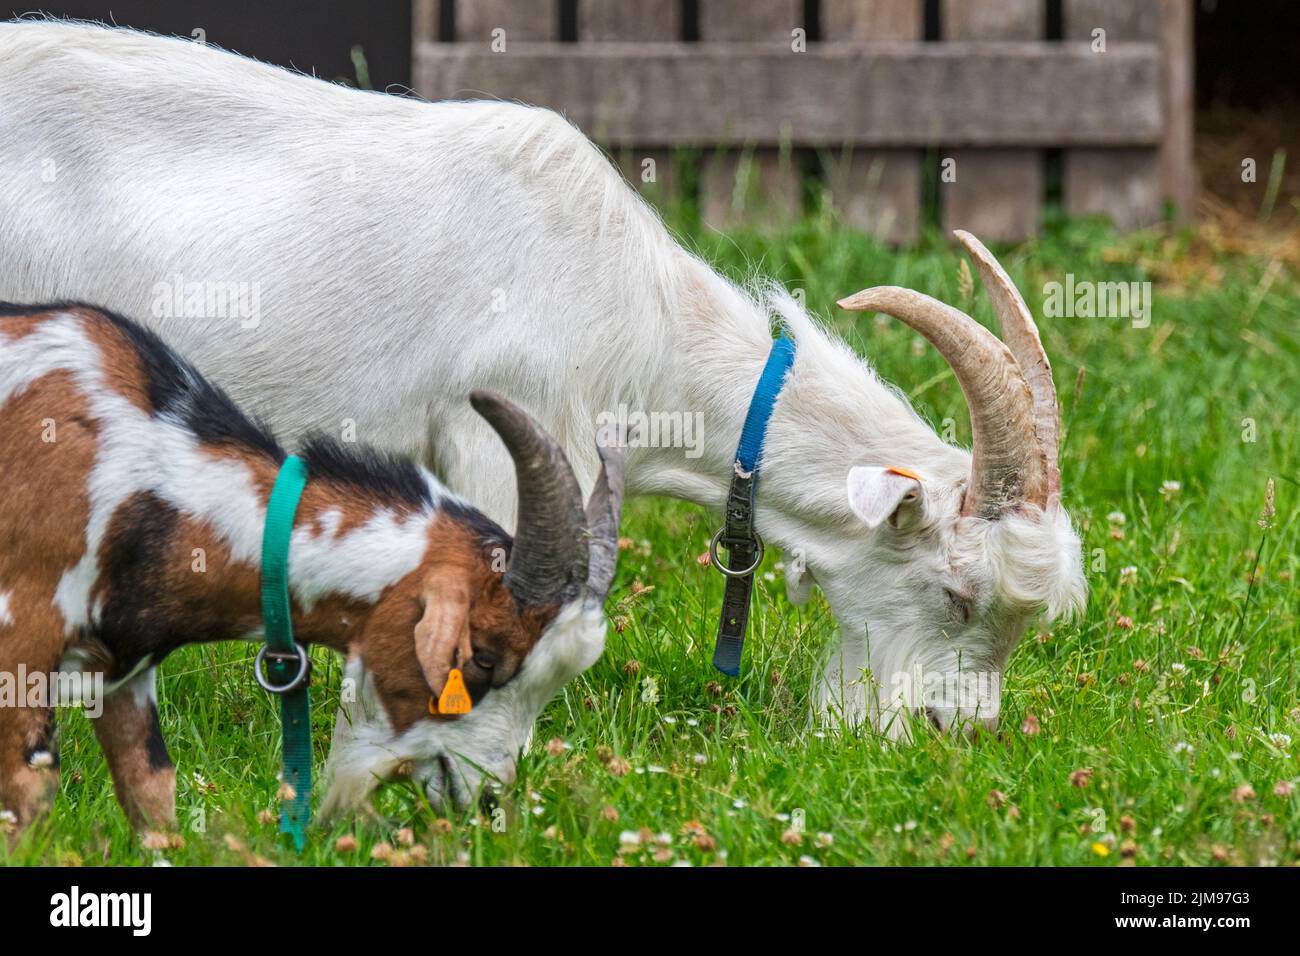 Two milk goats grazing in grassland at farm Stock Photo